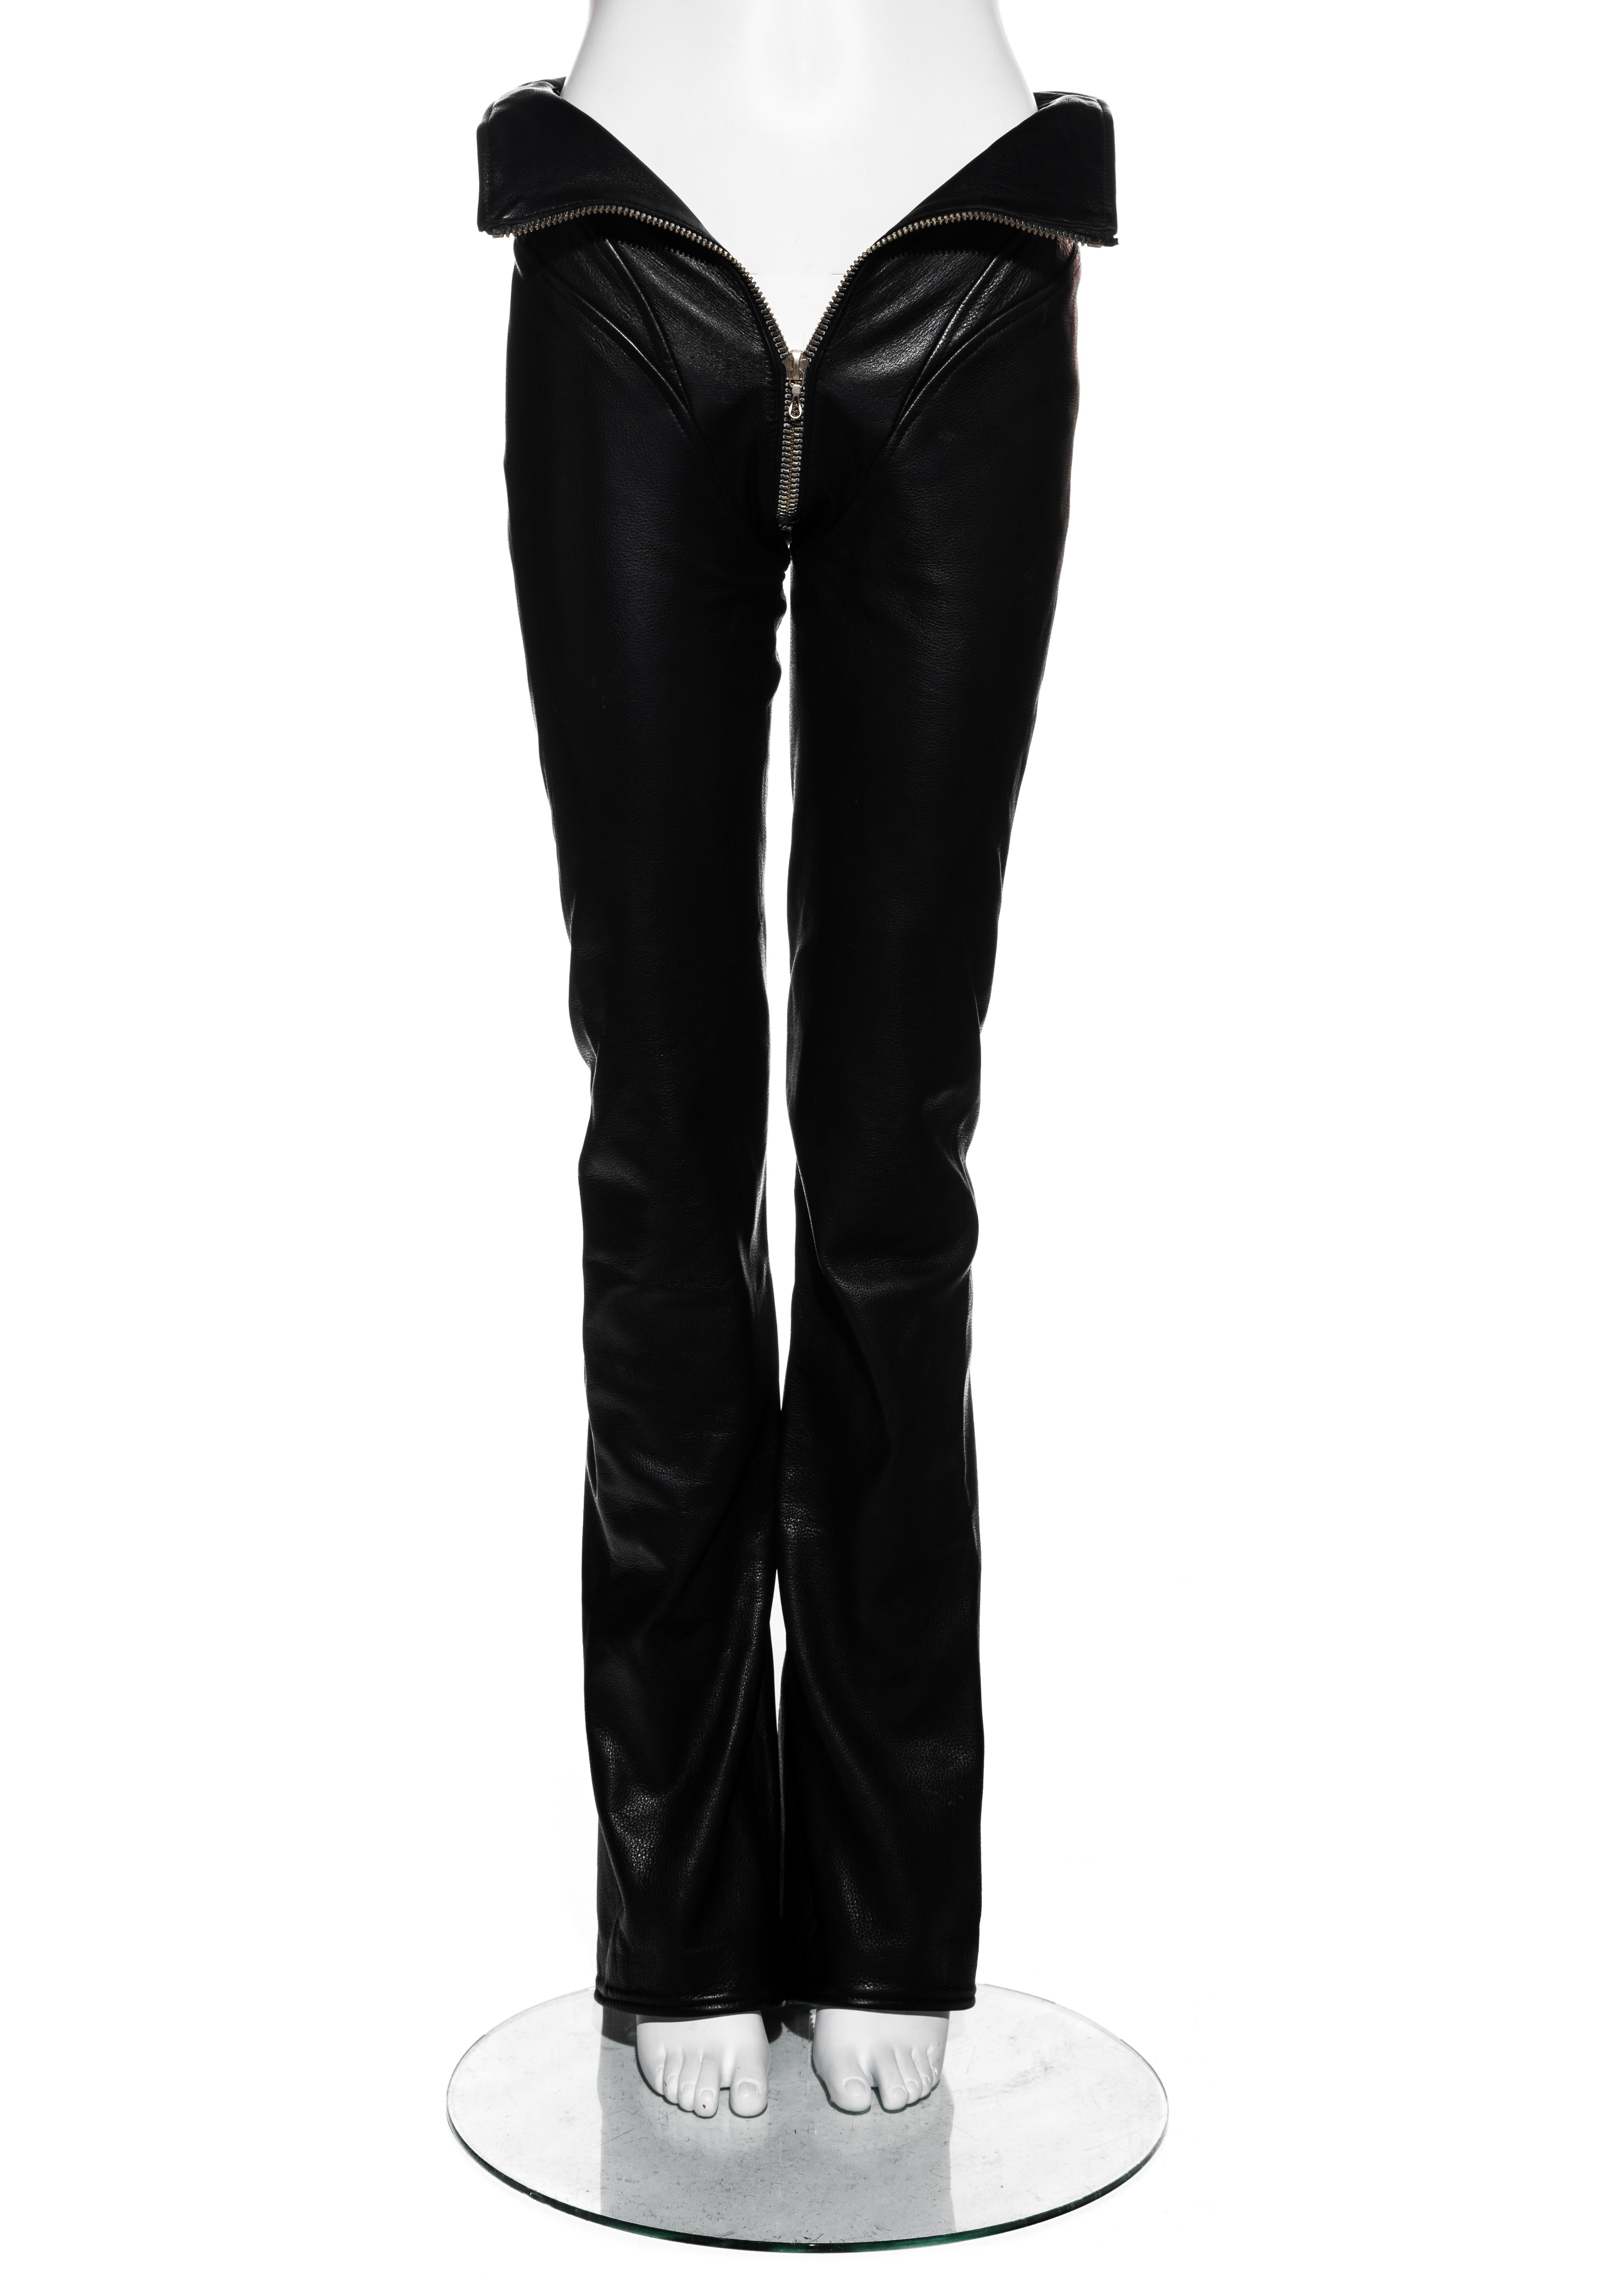 ▪ Vivienne Westwood black leather pants 
▪ 100% Leather
▪ Metal crotch zipper 
▪ High rise corseted waist 
▪ Zippers at back leg
▪ FR 38 - UK 10 - US 6
▪ Fall-Winter 1997